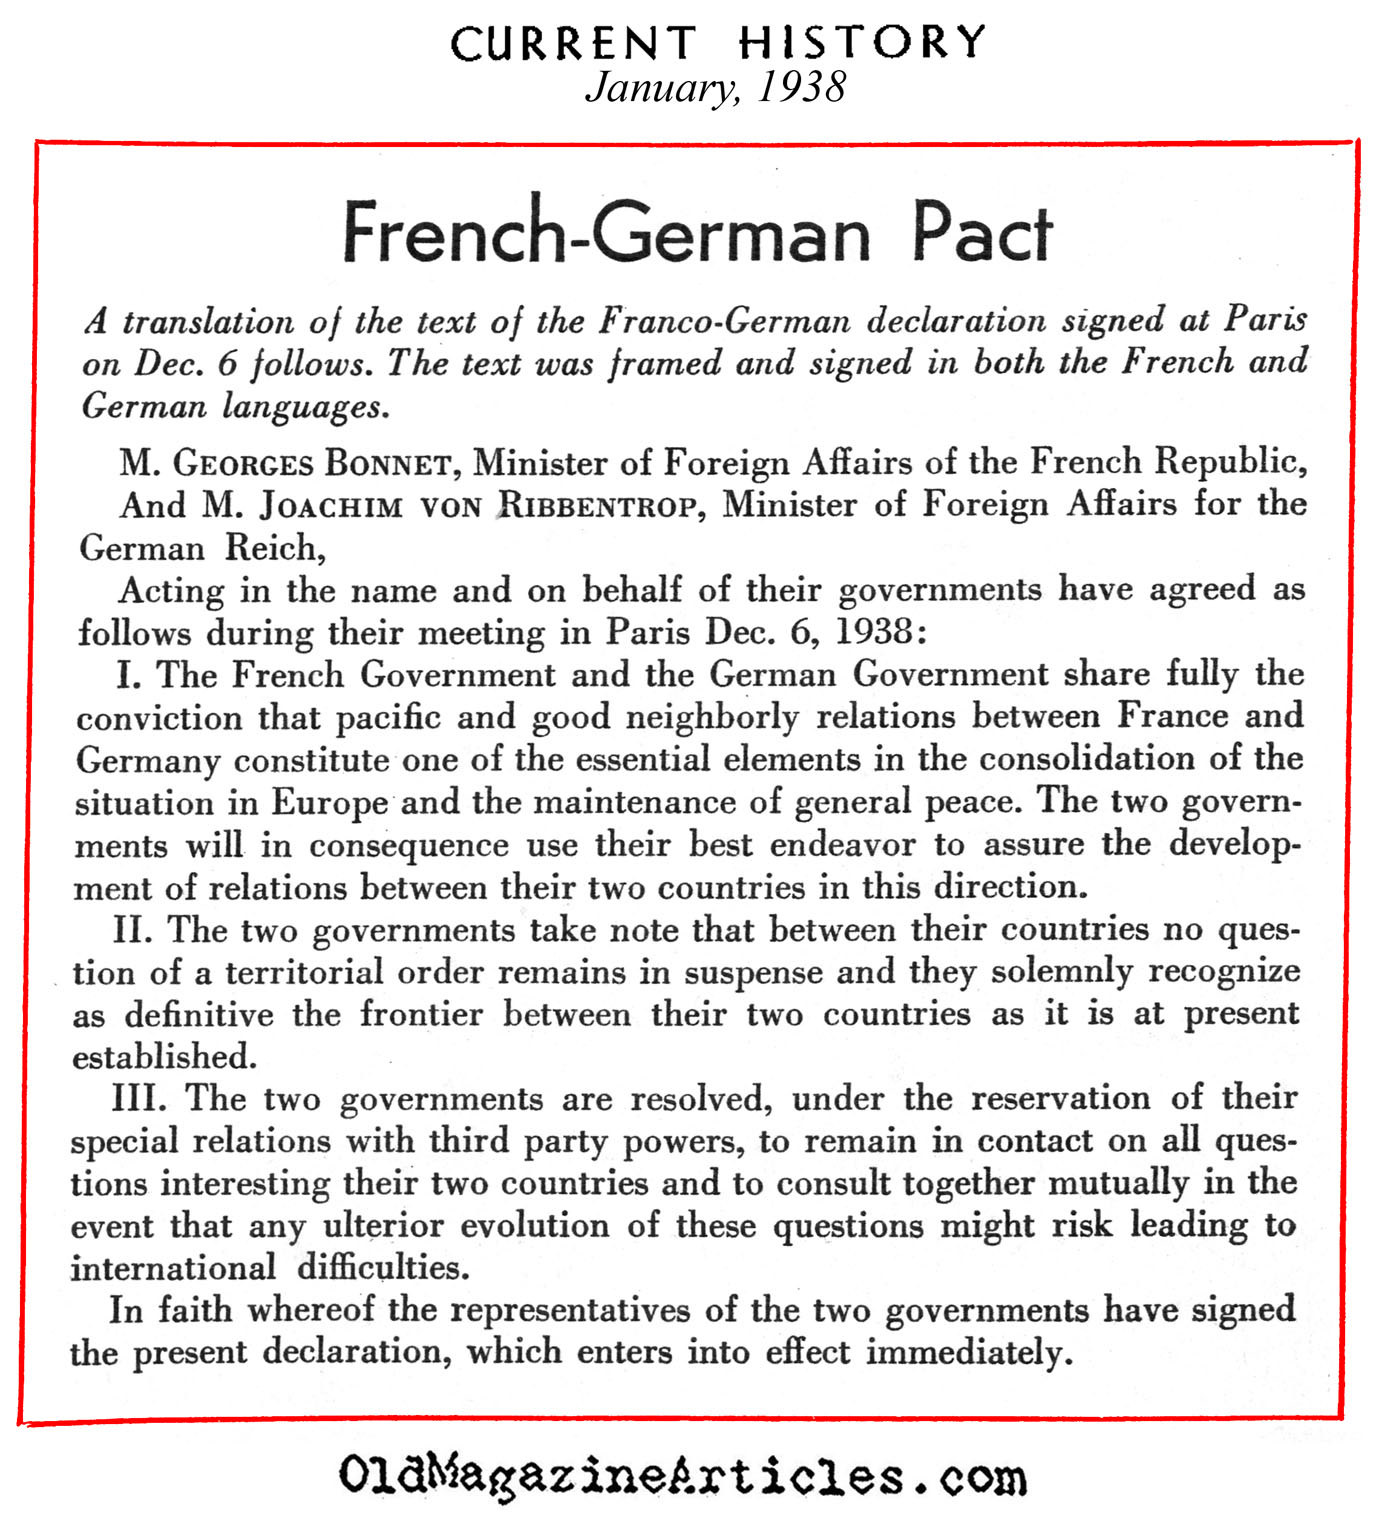 The French-German Non-Aggression Agreement (Current History, 1938)